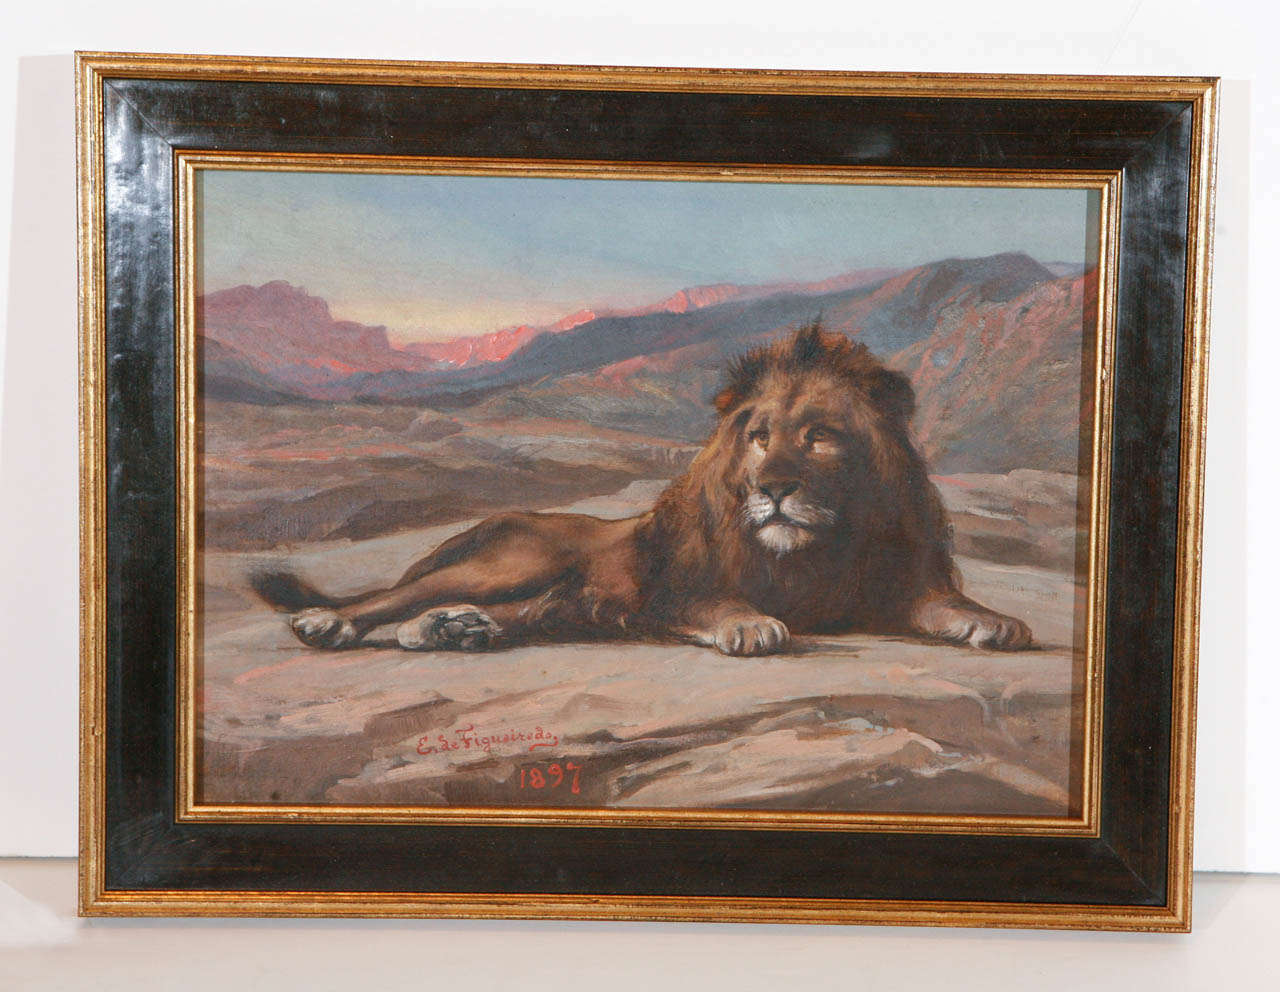 Original, signed and dated, oil-on-board painting of a recumbent lion by noted Brazilian artist, Pedro Américo de Figueiredo e Melo (1843-1905)